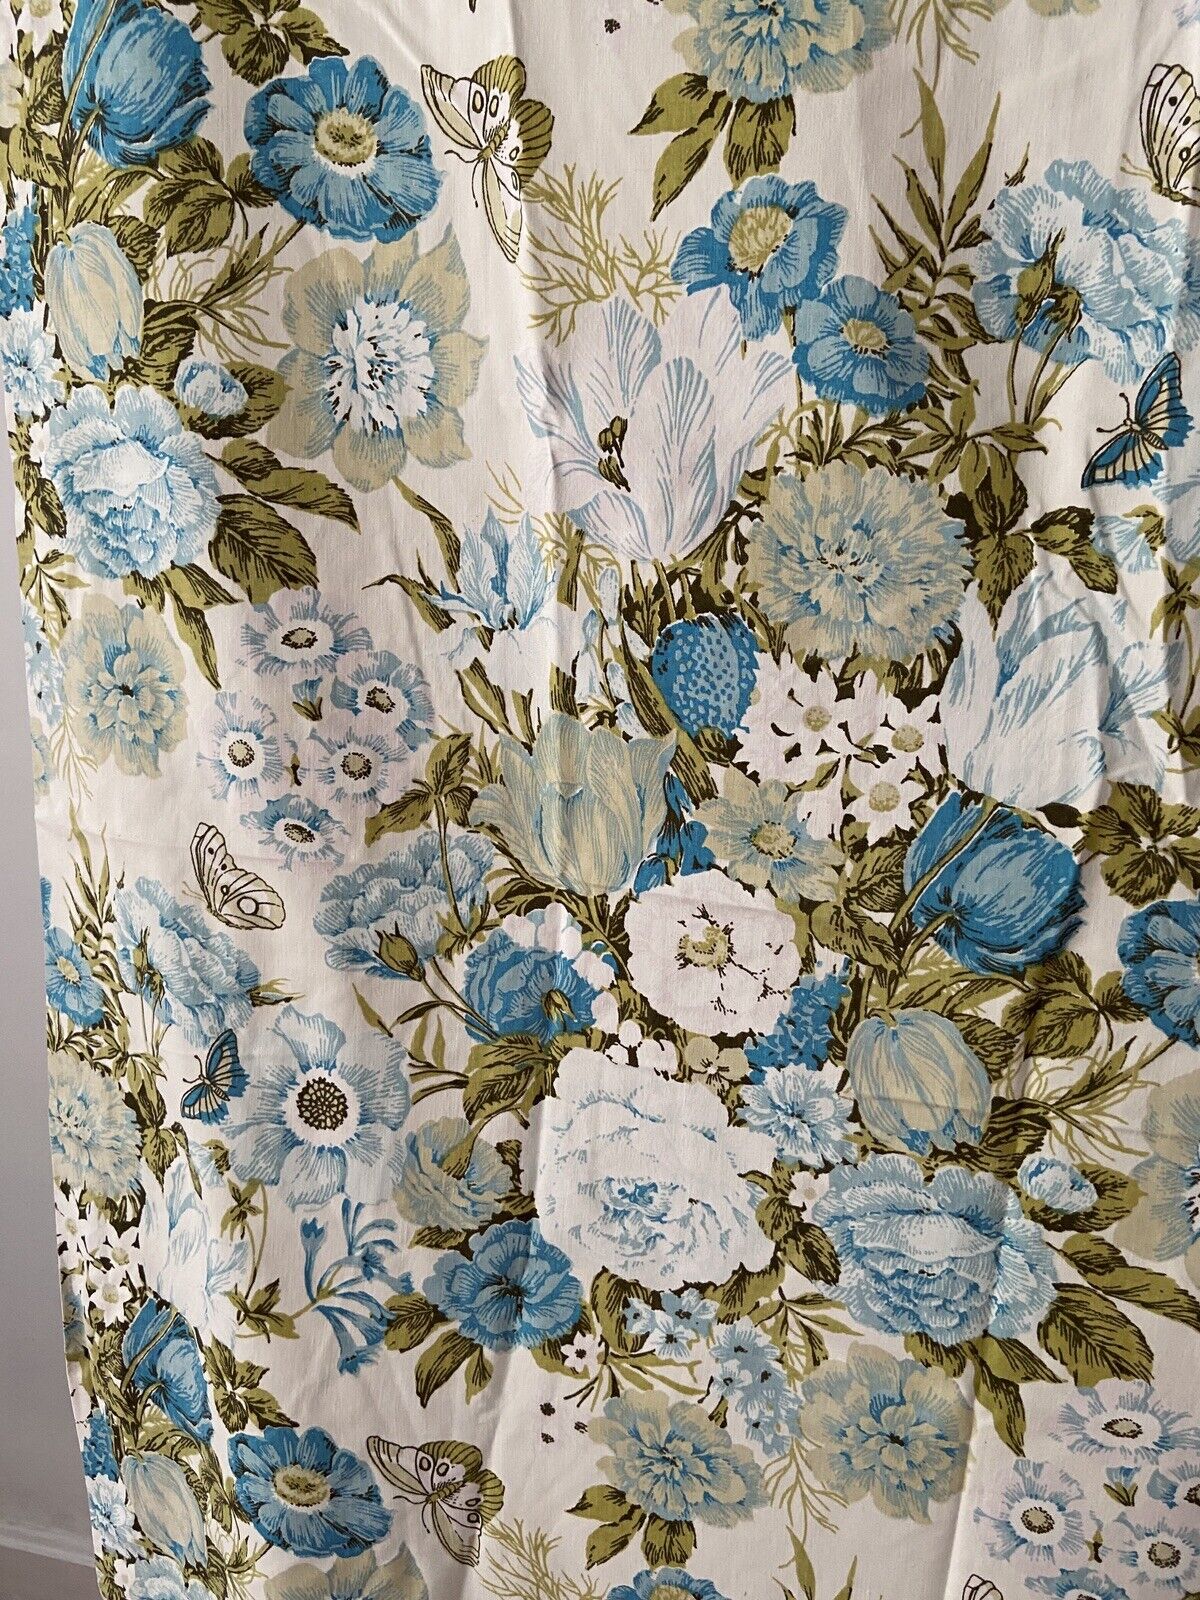 Vintage 1960s Green Blue Floral Butterfly Curtain 2 Panels Cotton 82 in x 38 in